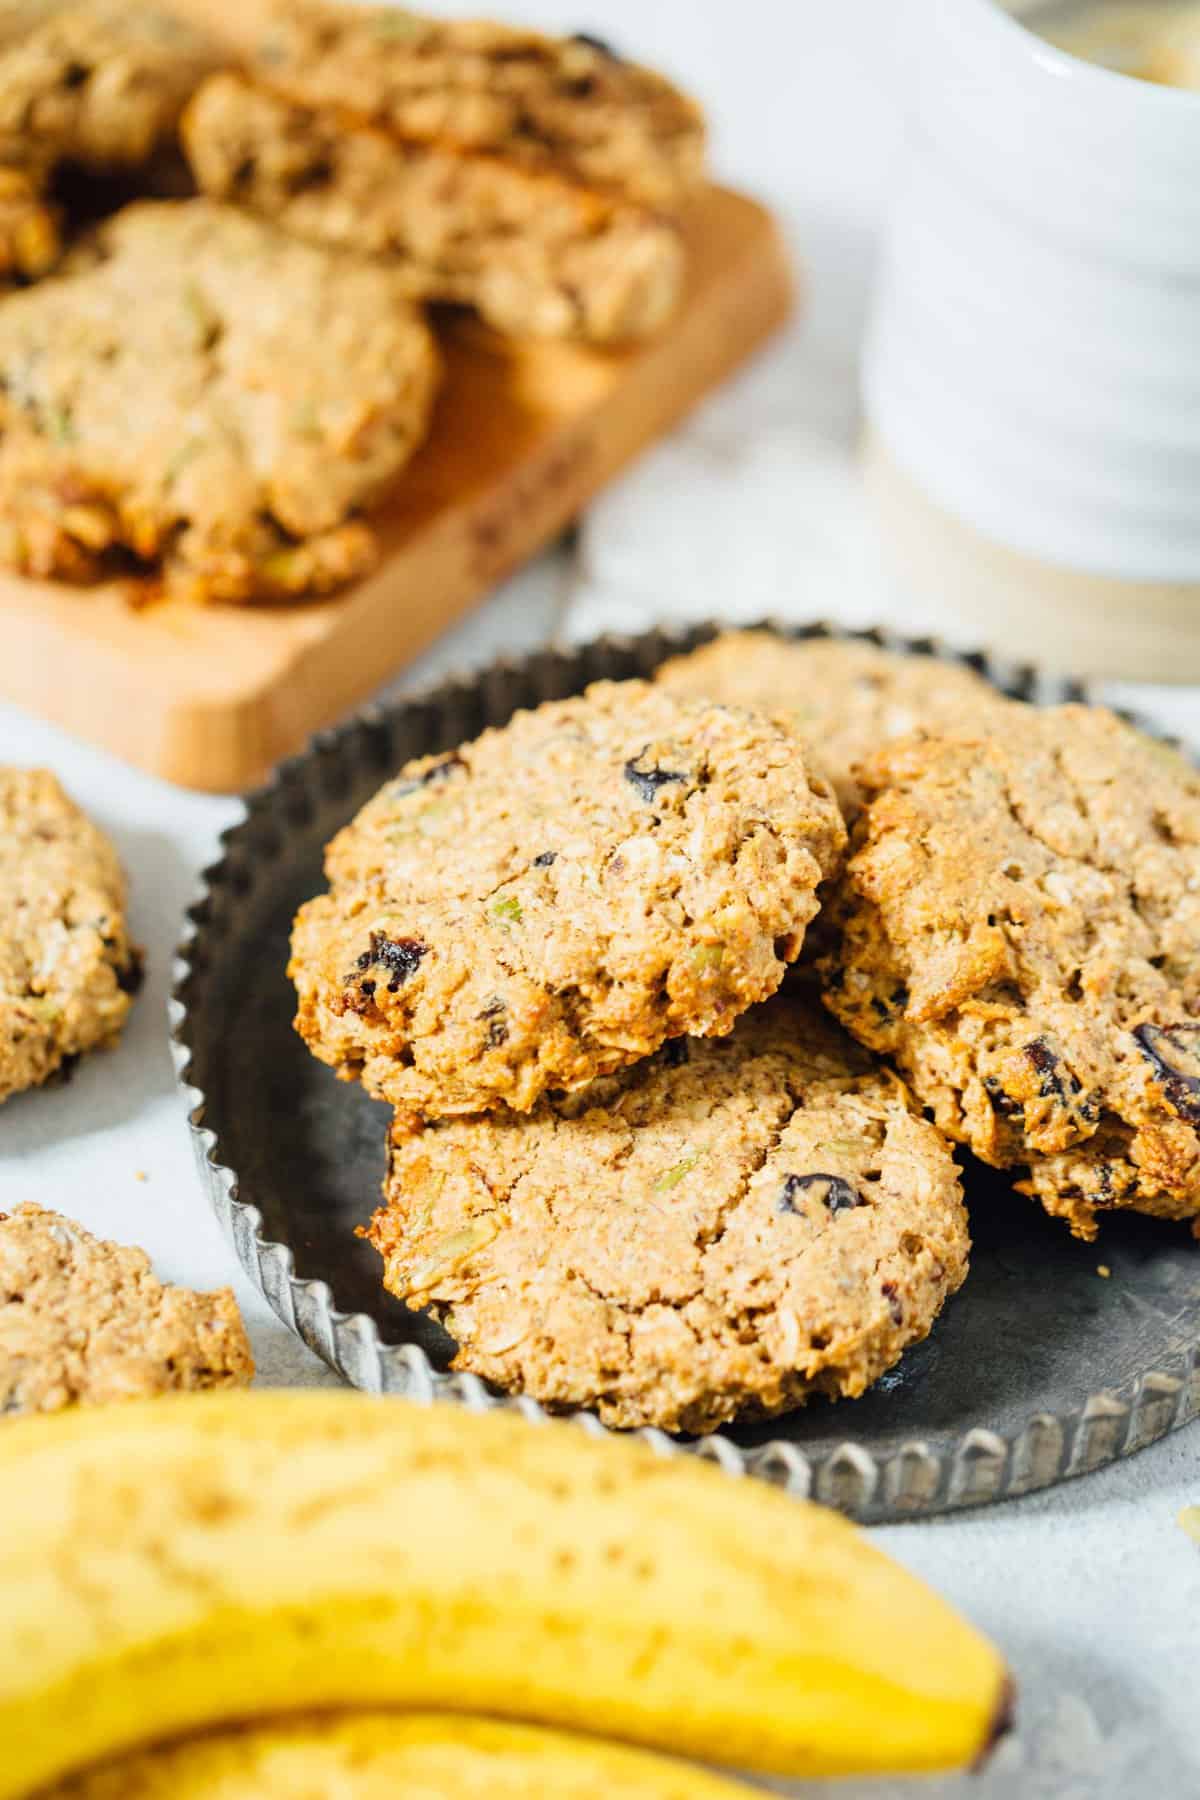 Naturally sweetened, vegan, and gluten-free. These breakfast cookies are a great on-the-go bite and good for any time of day! #cookies #breakfastcookies #glutenfreebaking #dairyfree #veganbaking #vegan #glutenfree #naturallysweetened